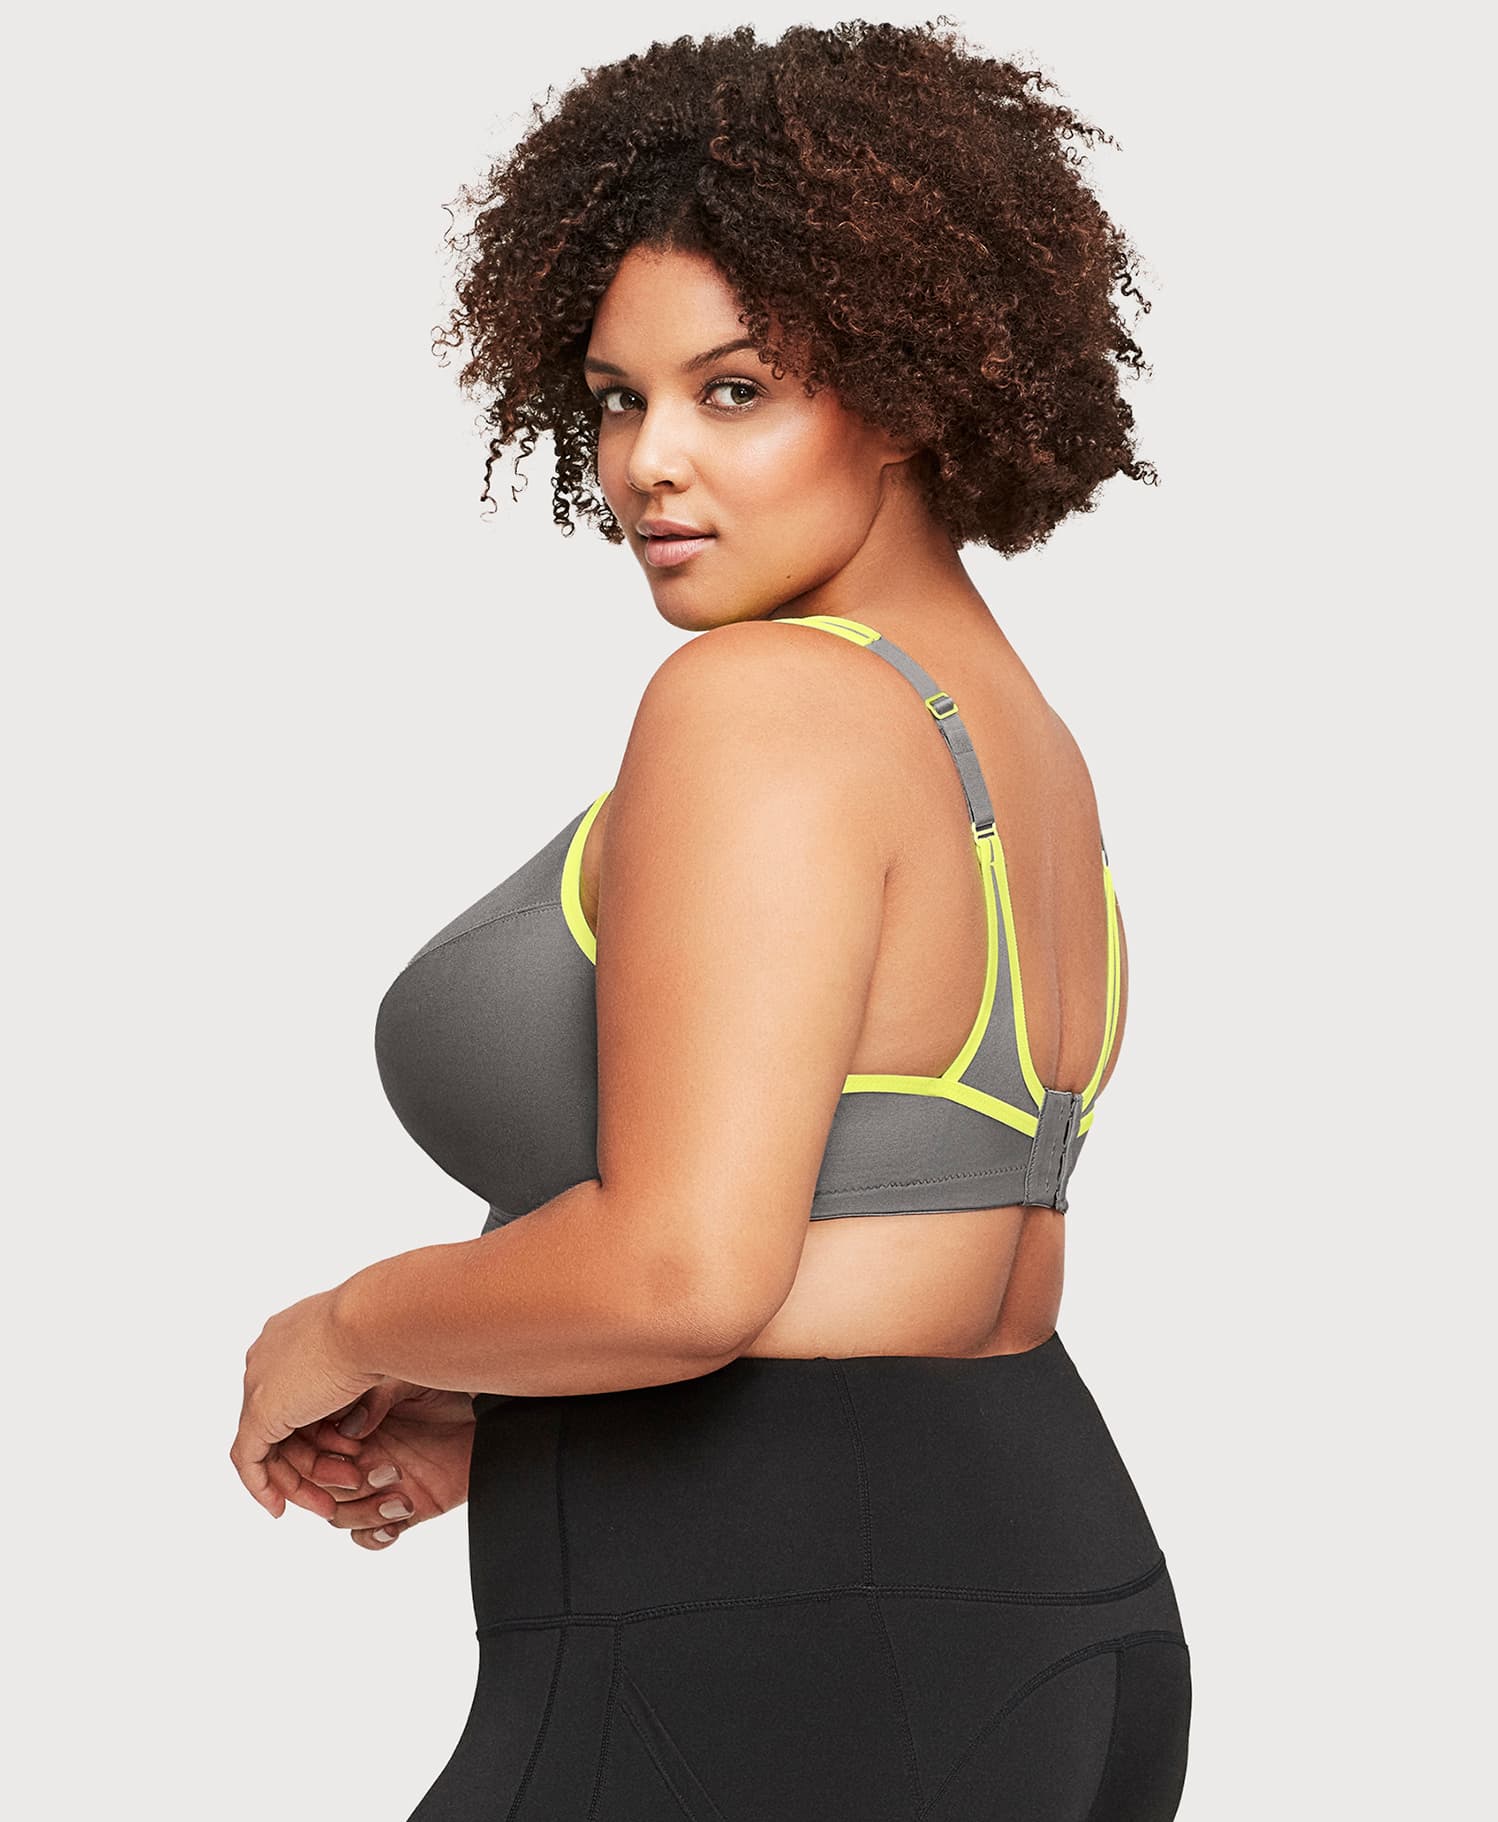 Beyond the H-Cup Bra: 25 bra brands that offer I cup bras or bigger